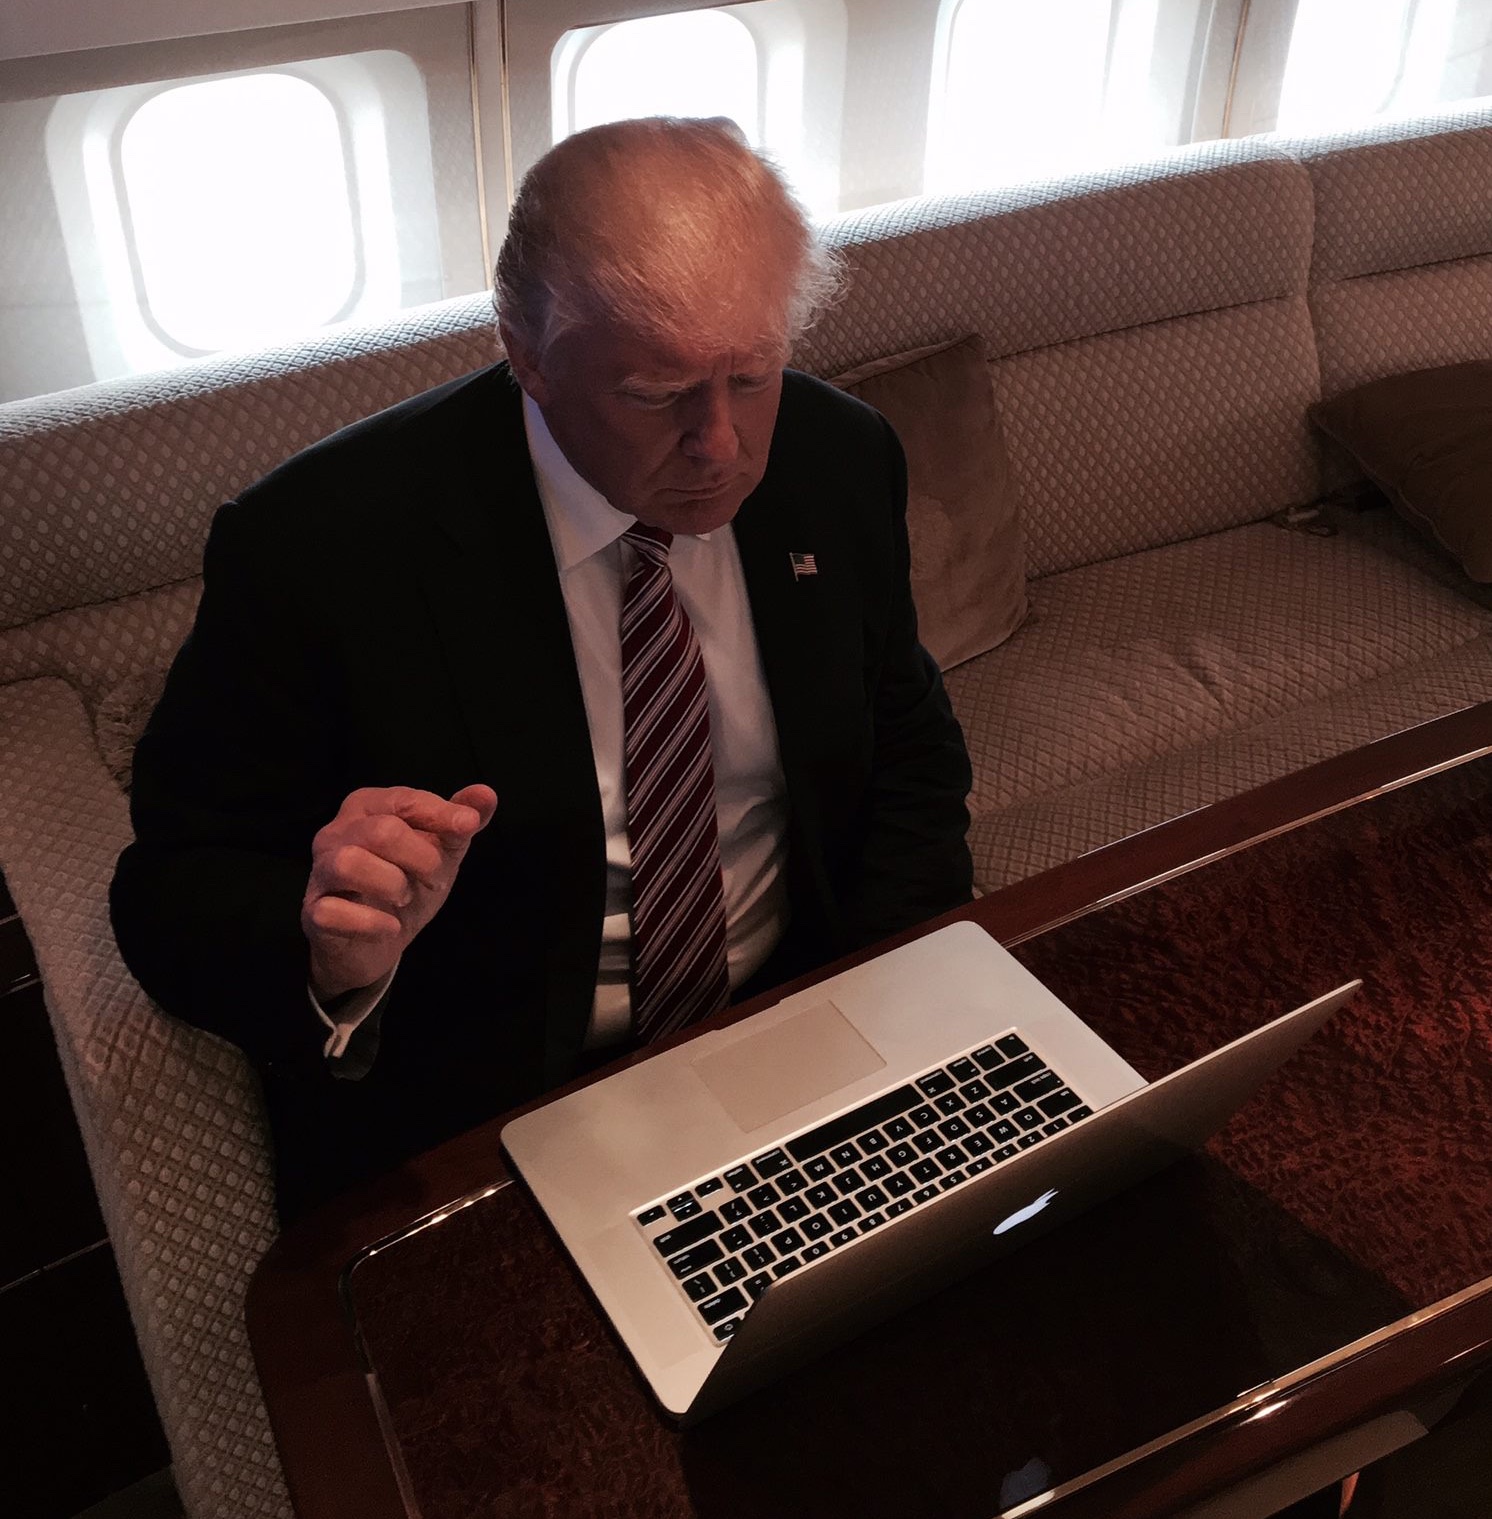 Here’s A Rare Photo Of Donald Trump Using A Computer